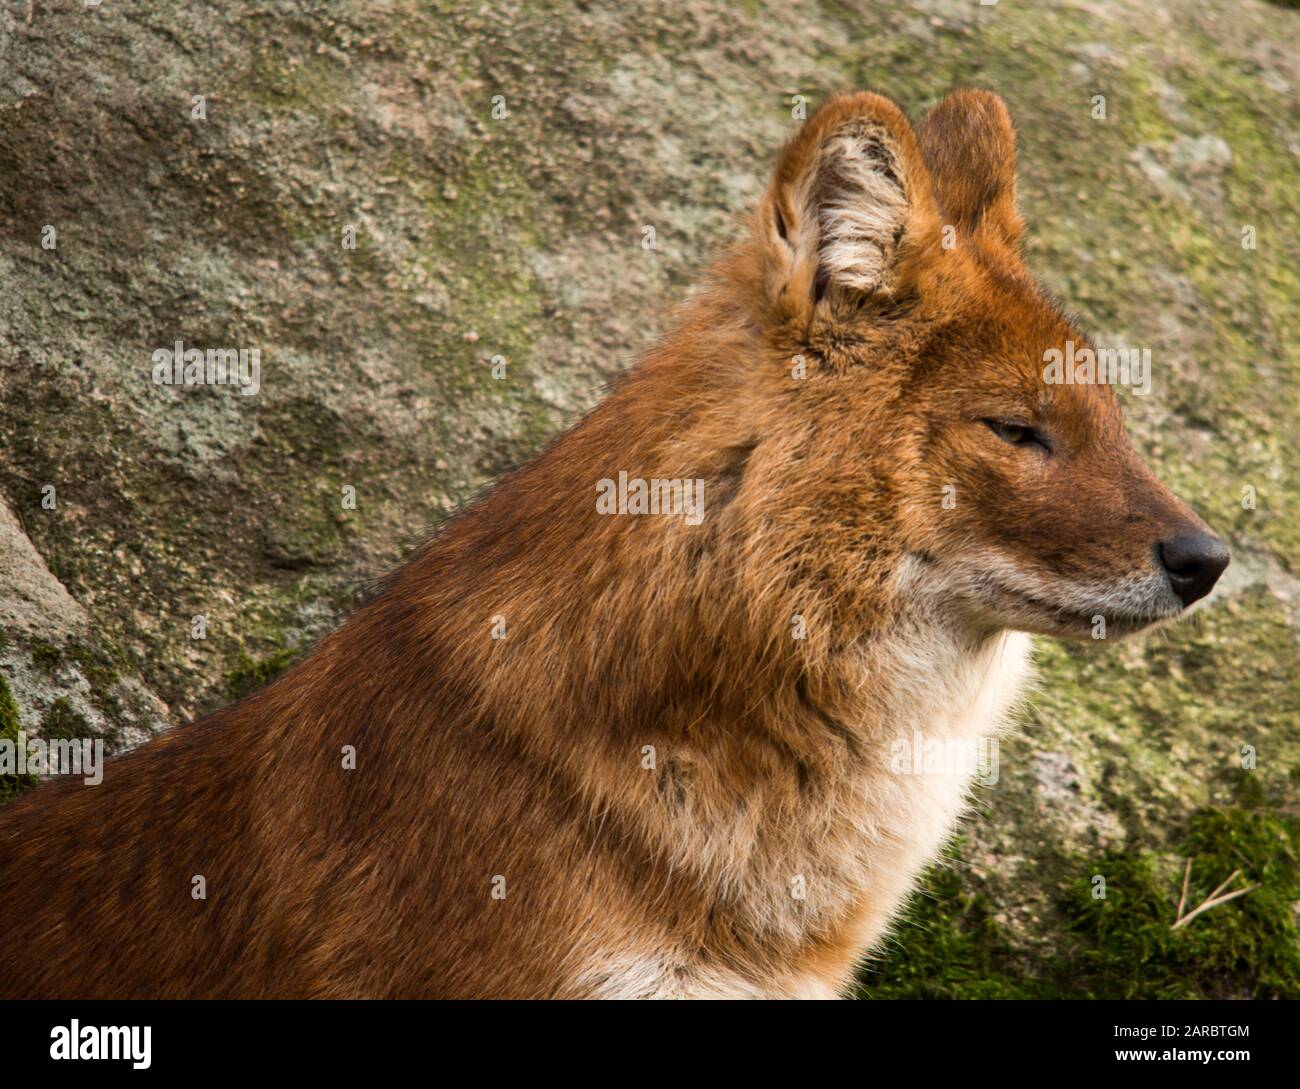 The dhole /doʊl/ (Cuon alpinus) is a canid native to Central, South, and Southeast Asia. Other English names for the species include Asian wild dog, A Stock Photo